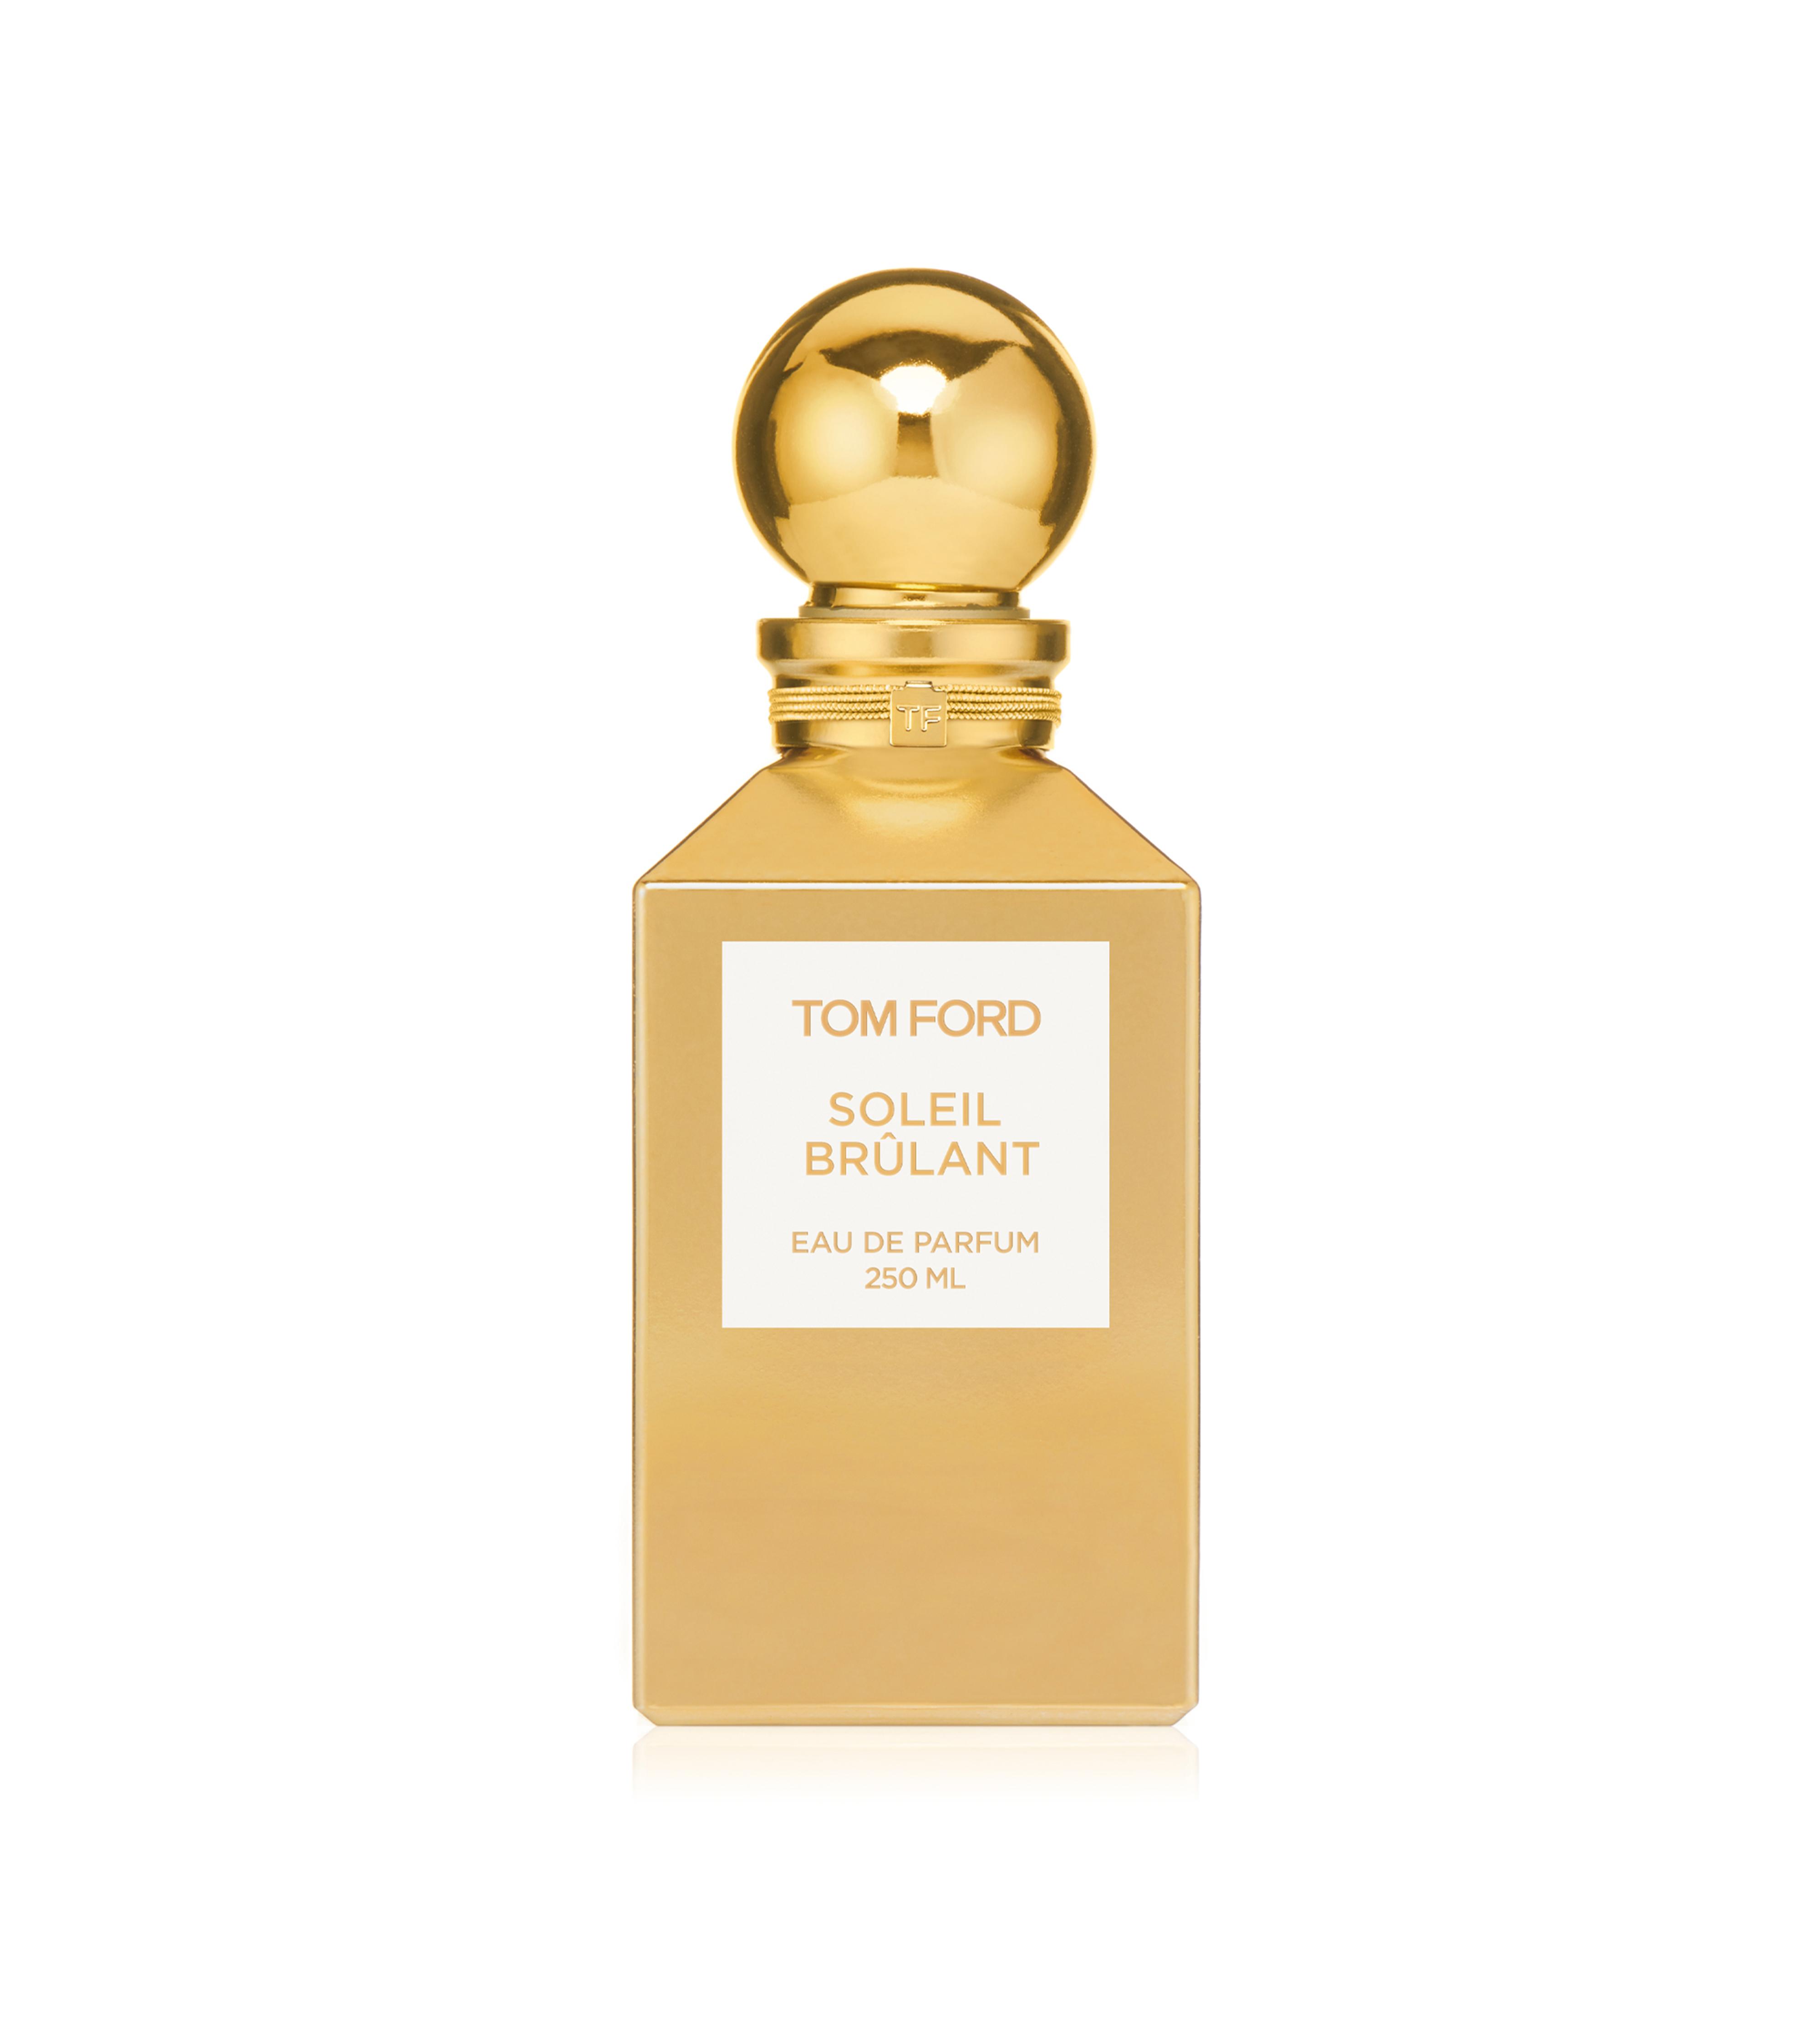 Perfume houses - Tom Ford • Scentertainer